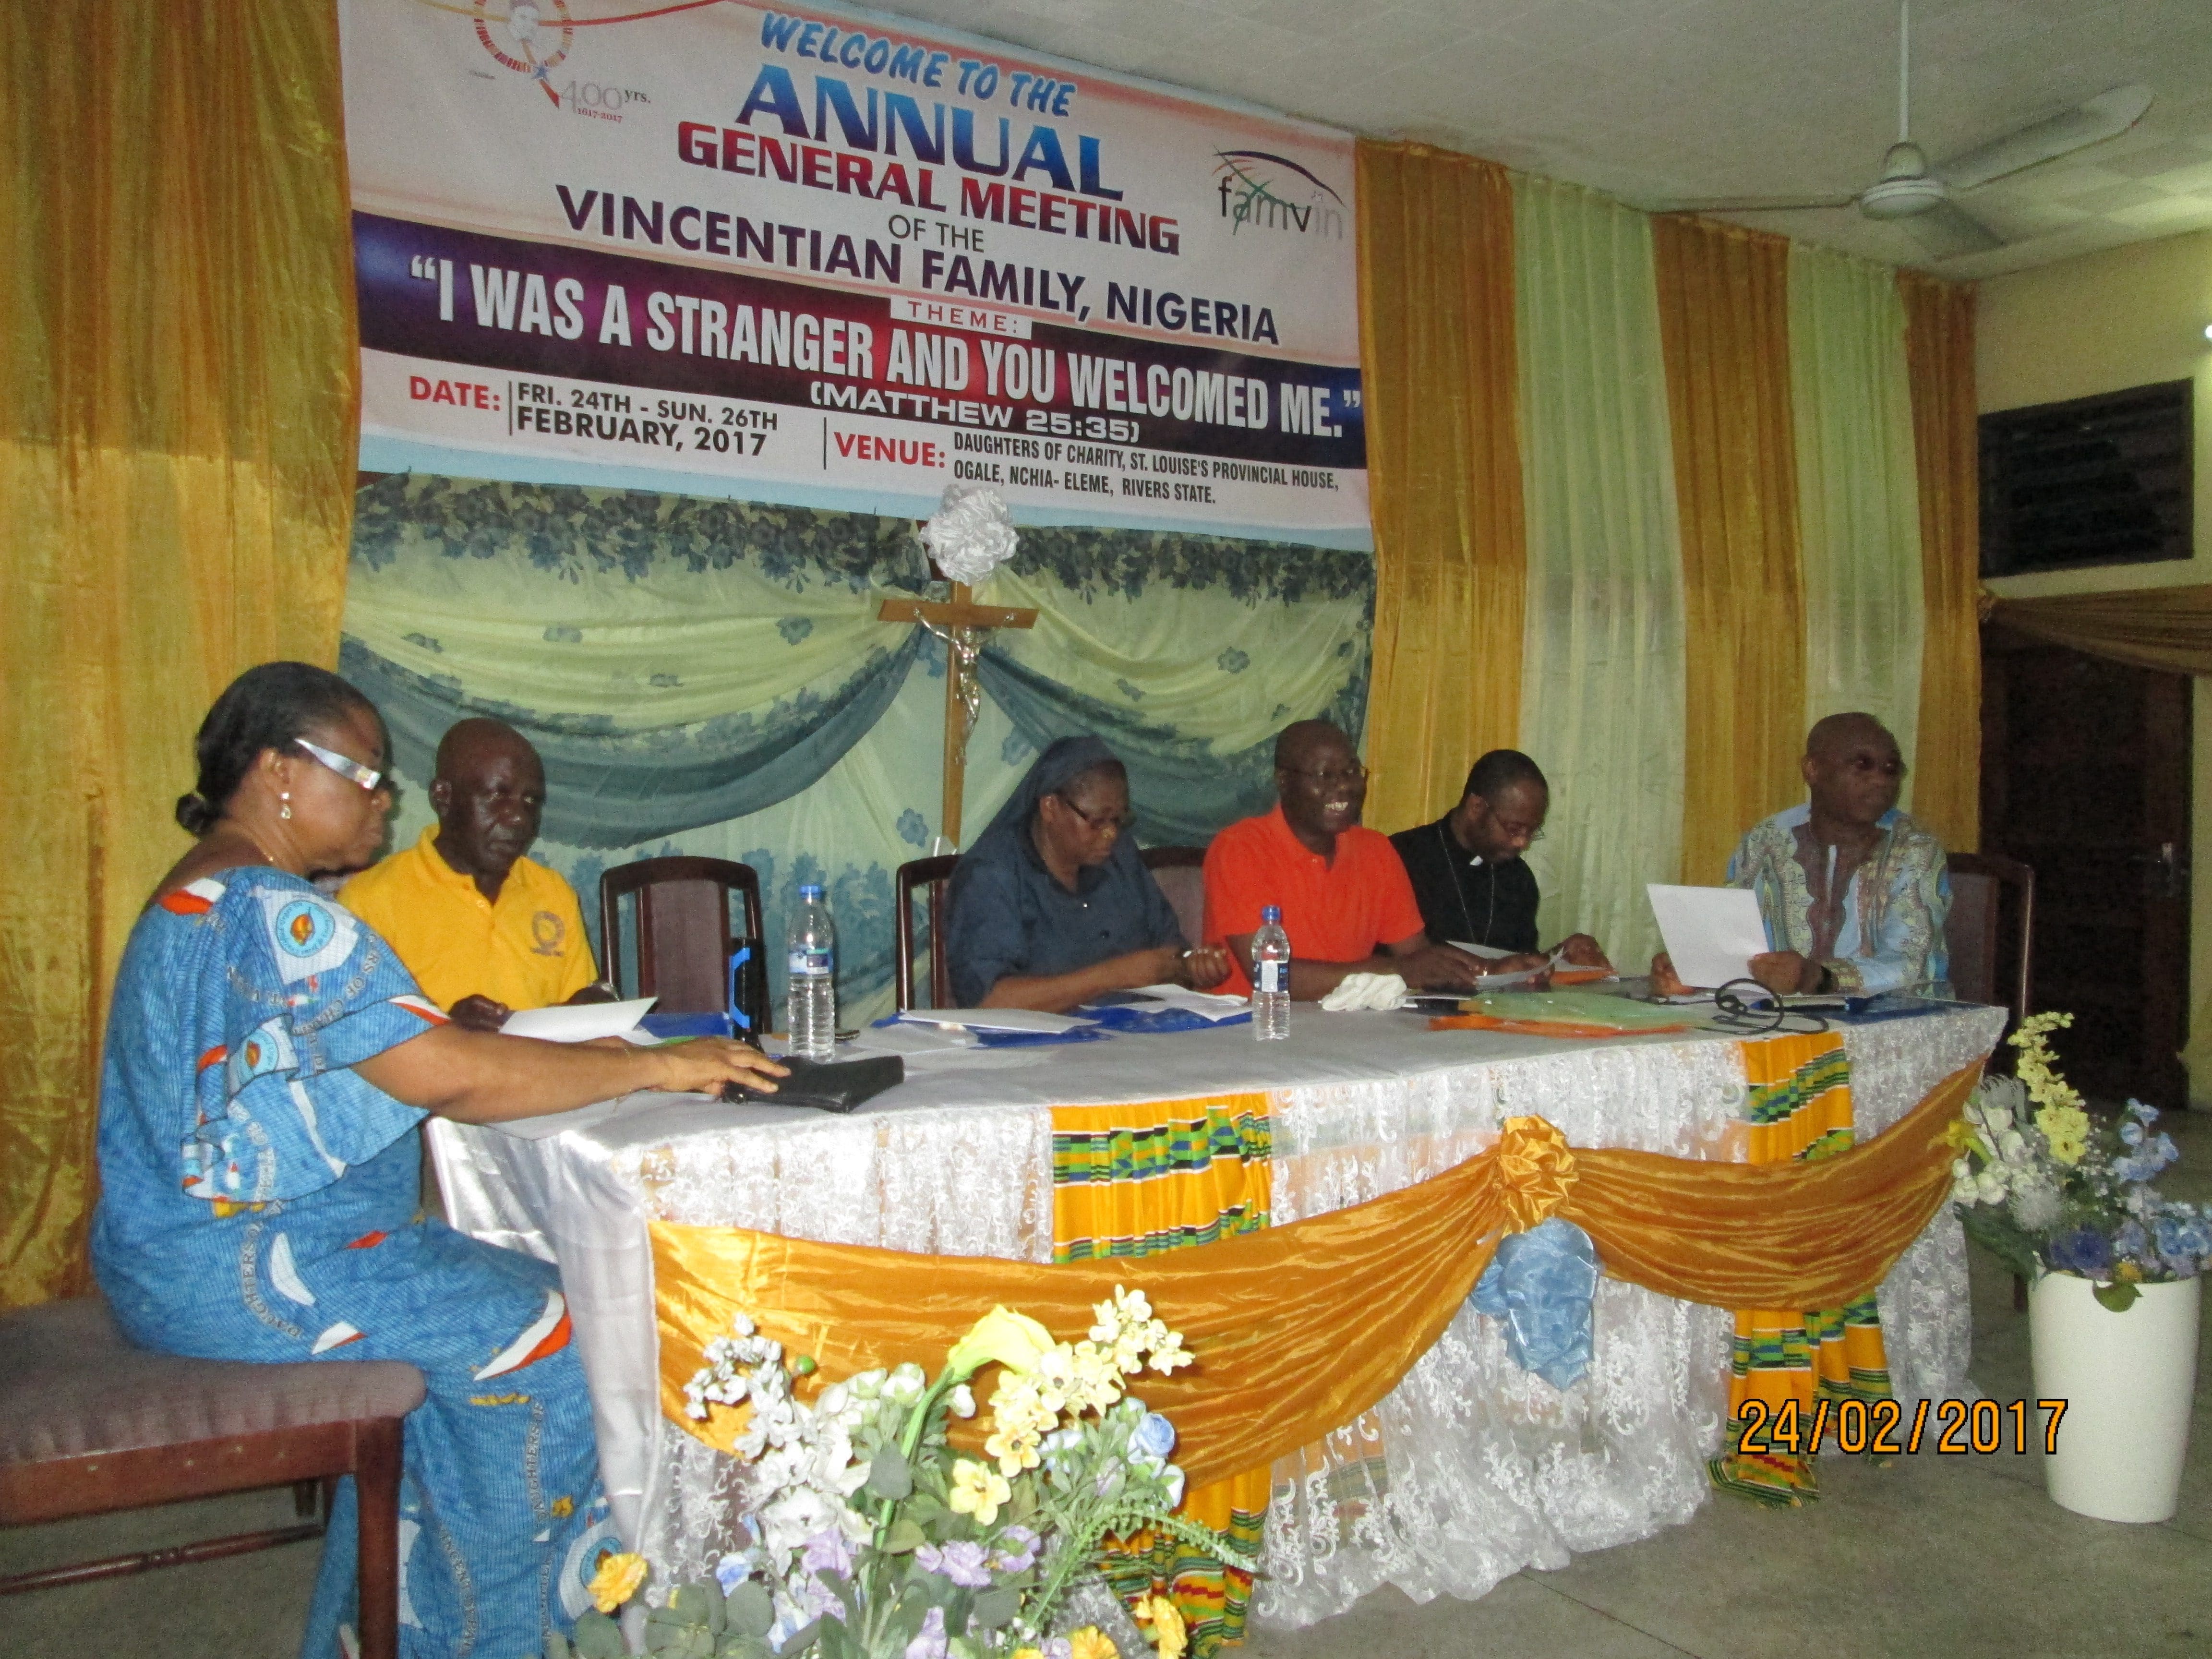 Vincentian Family Annual General Meeting in Nigeria 2017